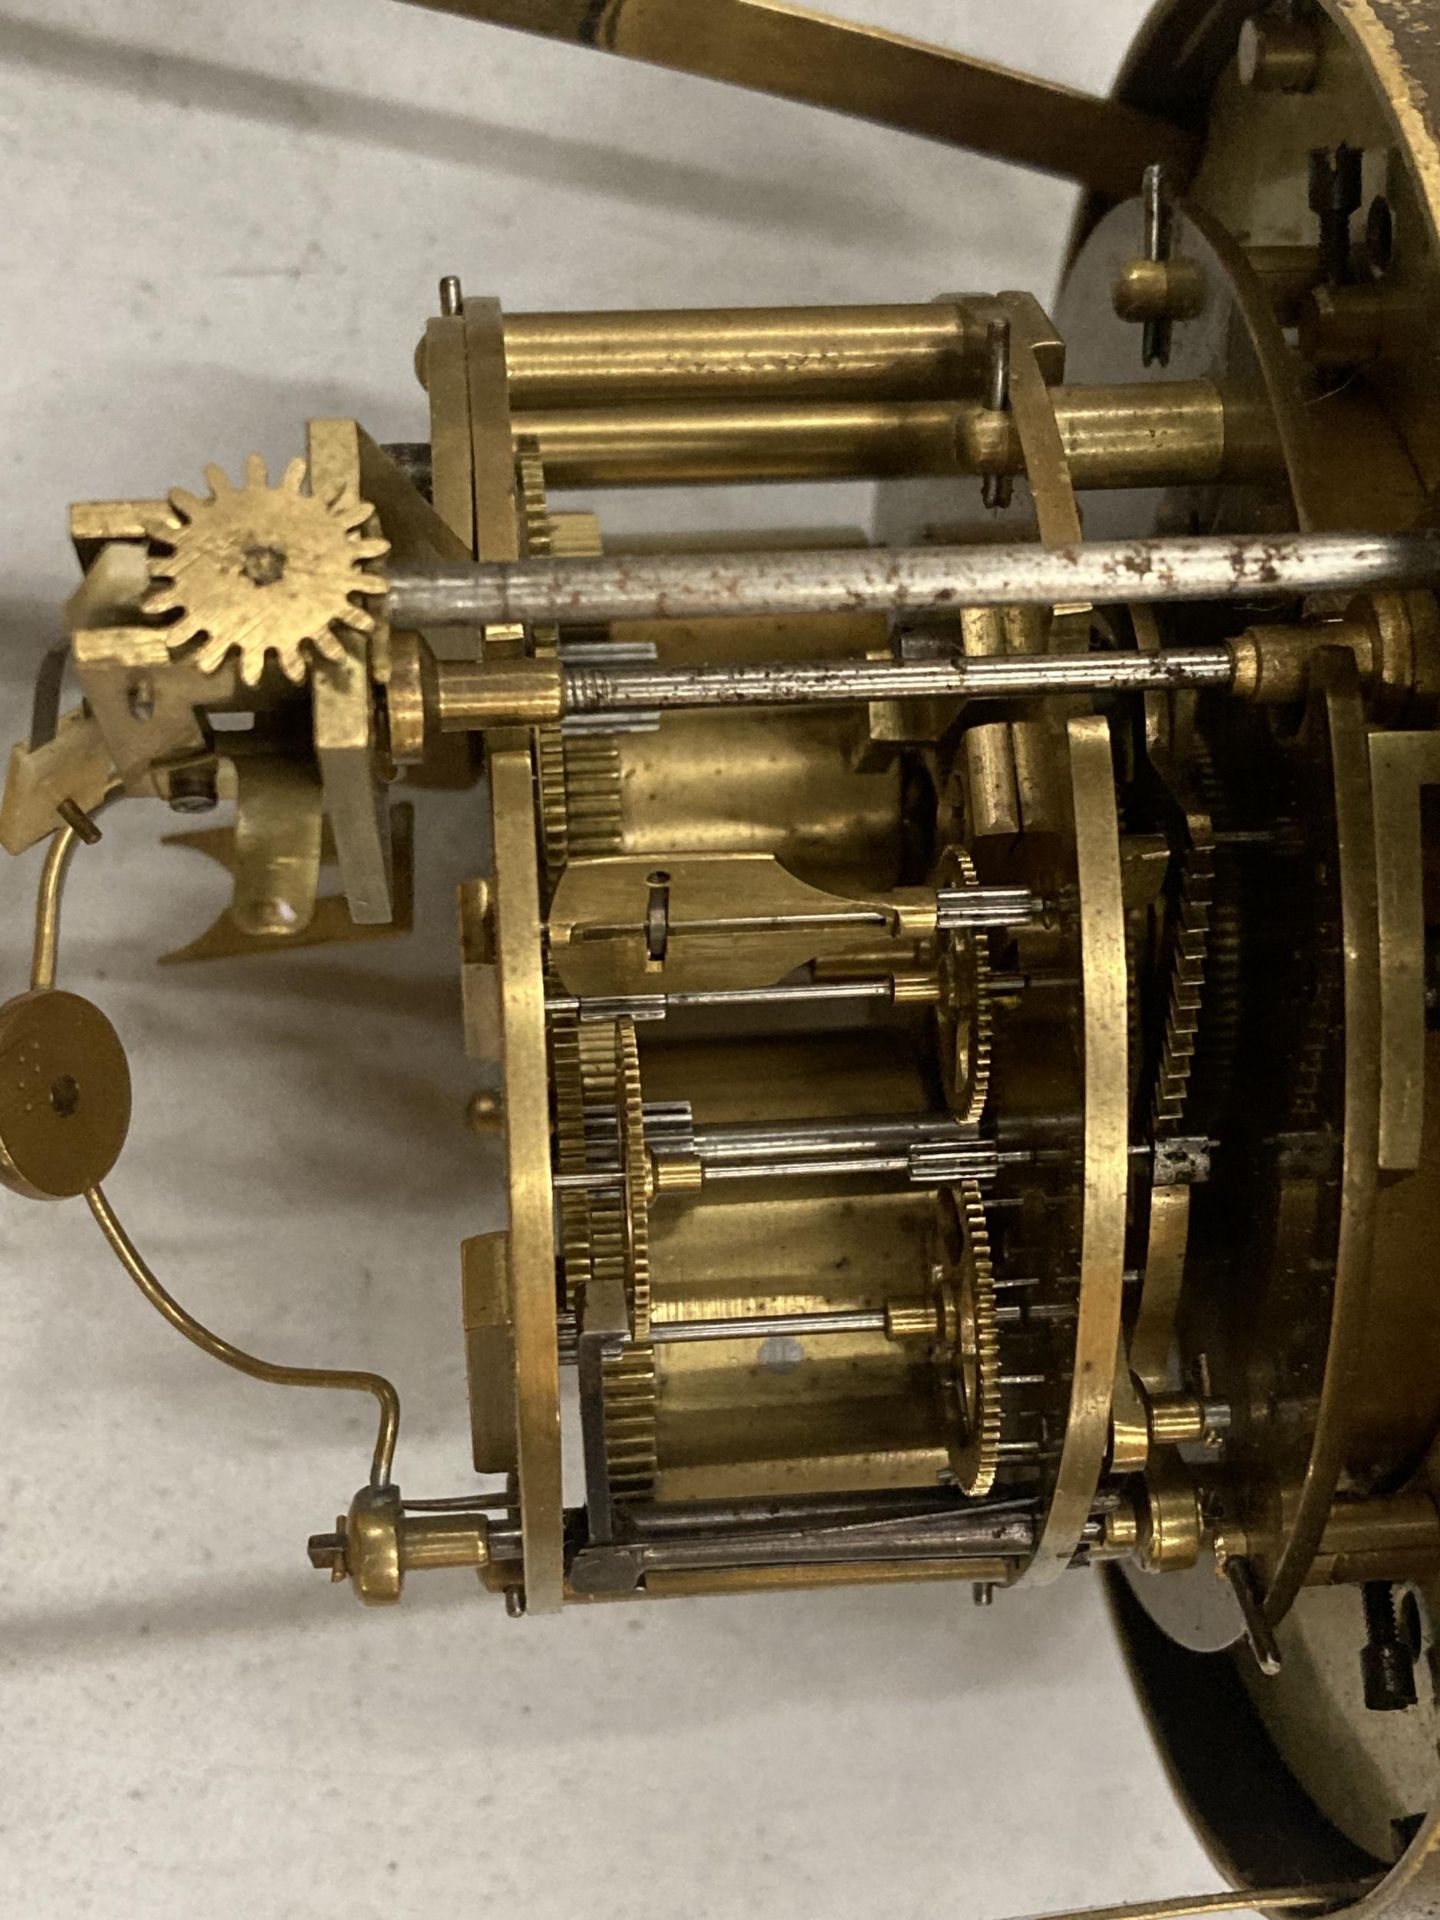 A VISUAL ESCAPEMENT CLOCK, BELIEVED WORKING ORDER - Image 3 of 3